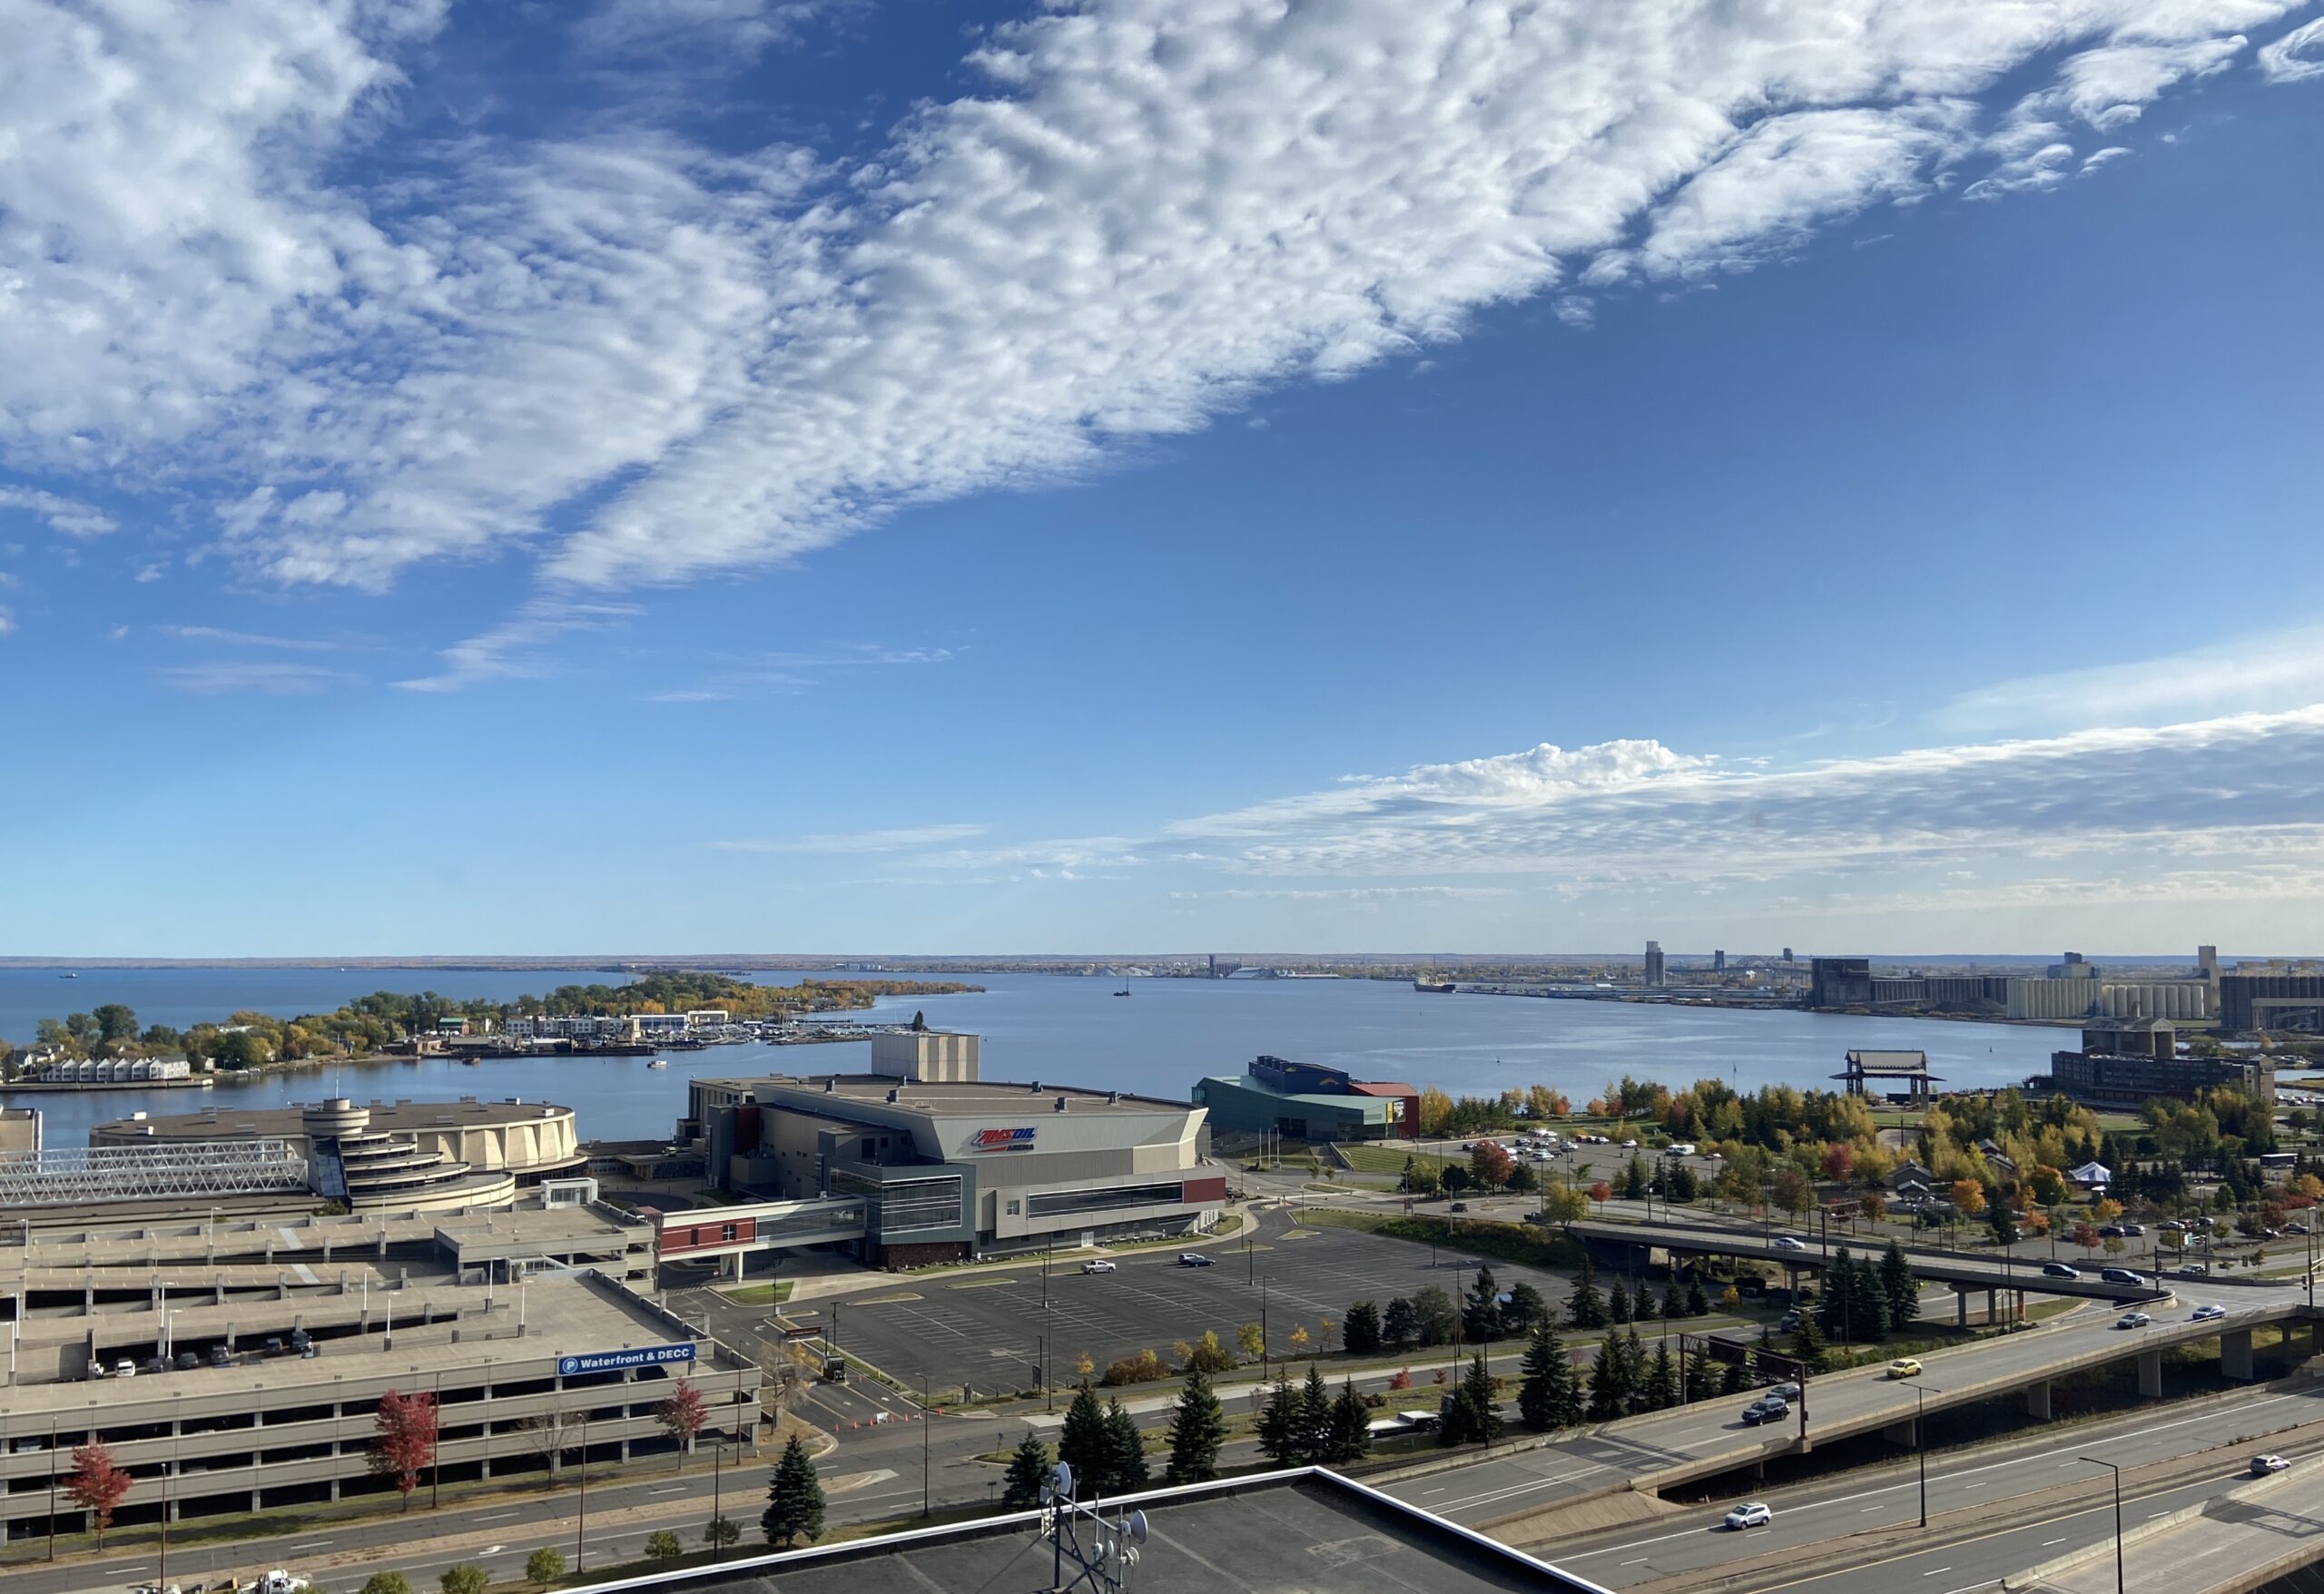 View from a building downtown Duluth overlooking Amsoil arena and the harbor